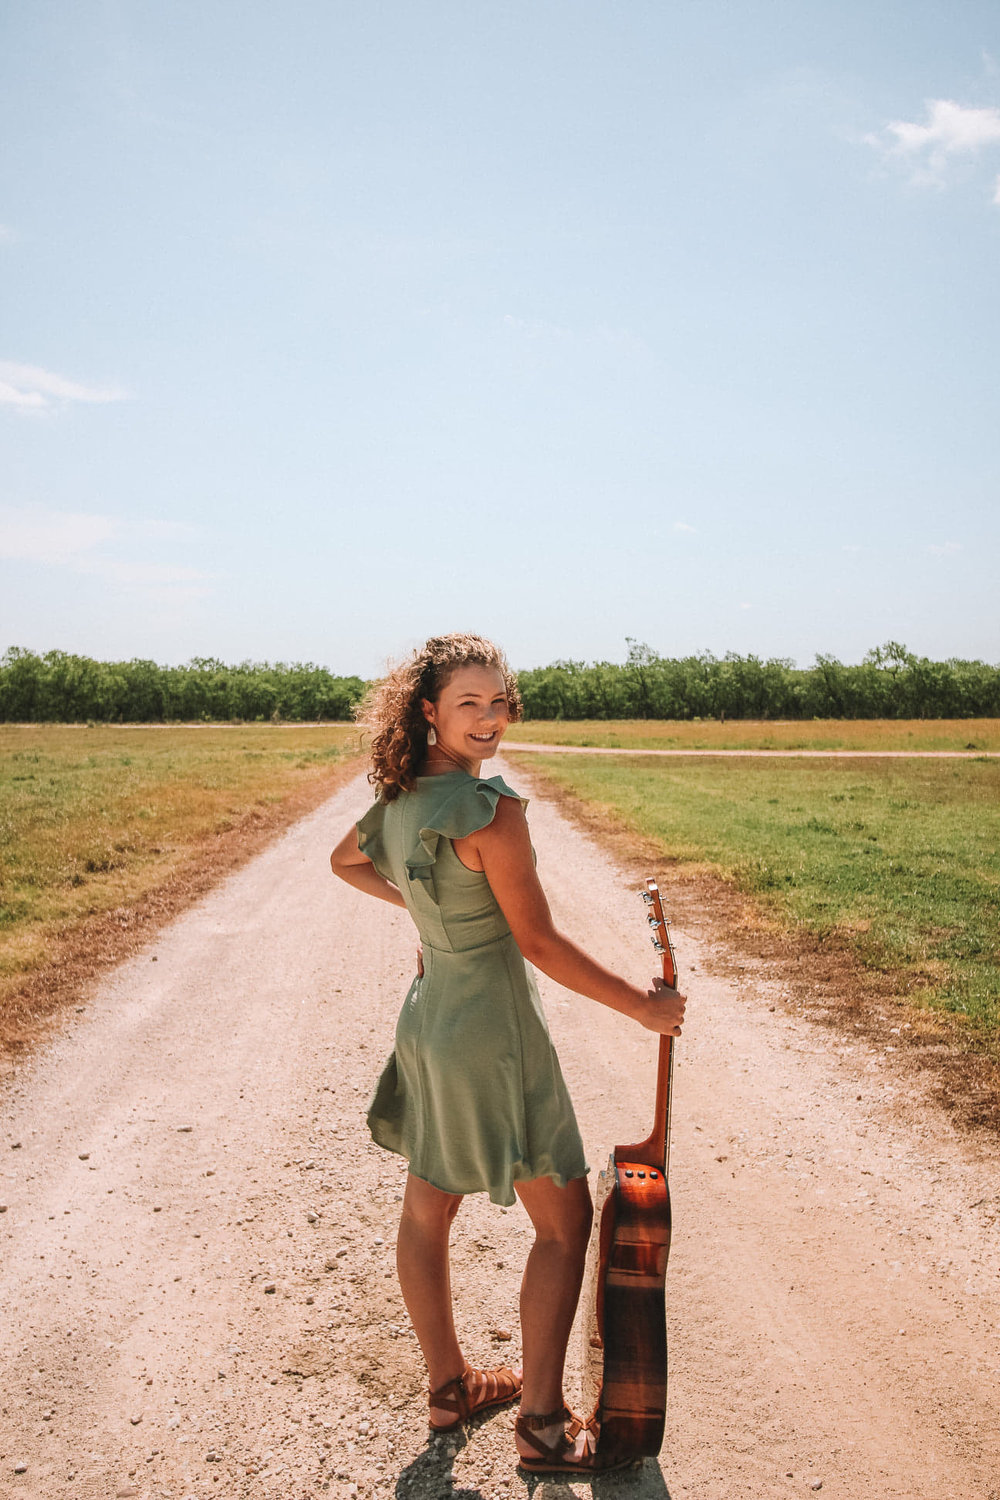 Although not at the crossroads, Grace Morgan, with her acoustic guitar, performs a rendition of a song that is about anything but a one-way street.